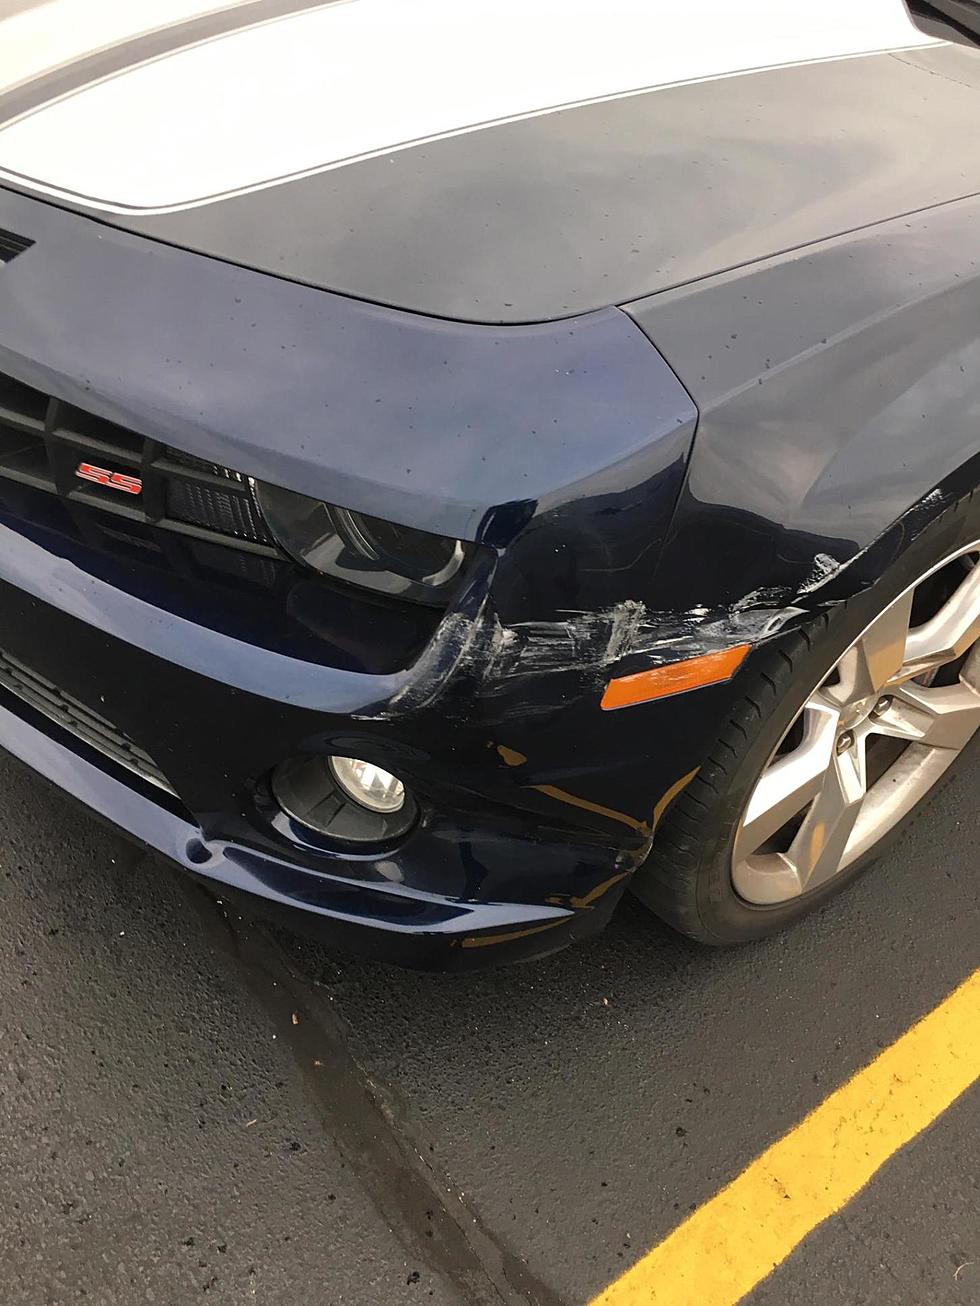 My Sons&#8217; Cars Were Hit While Parked in Parking Lots